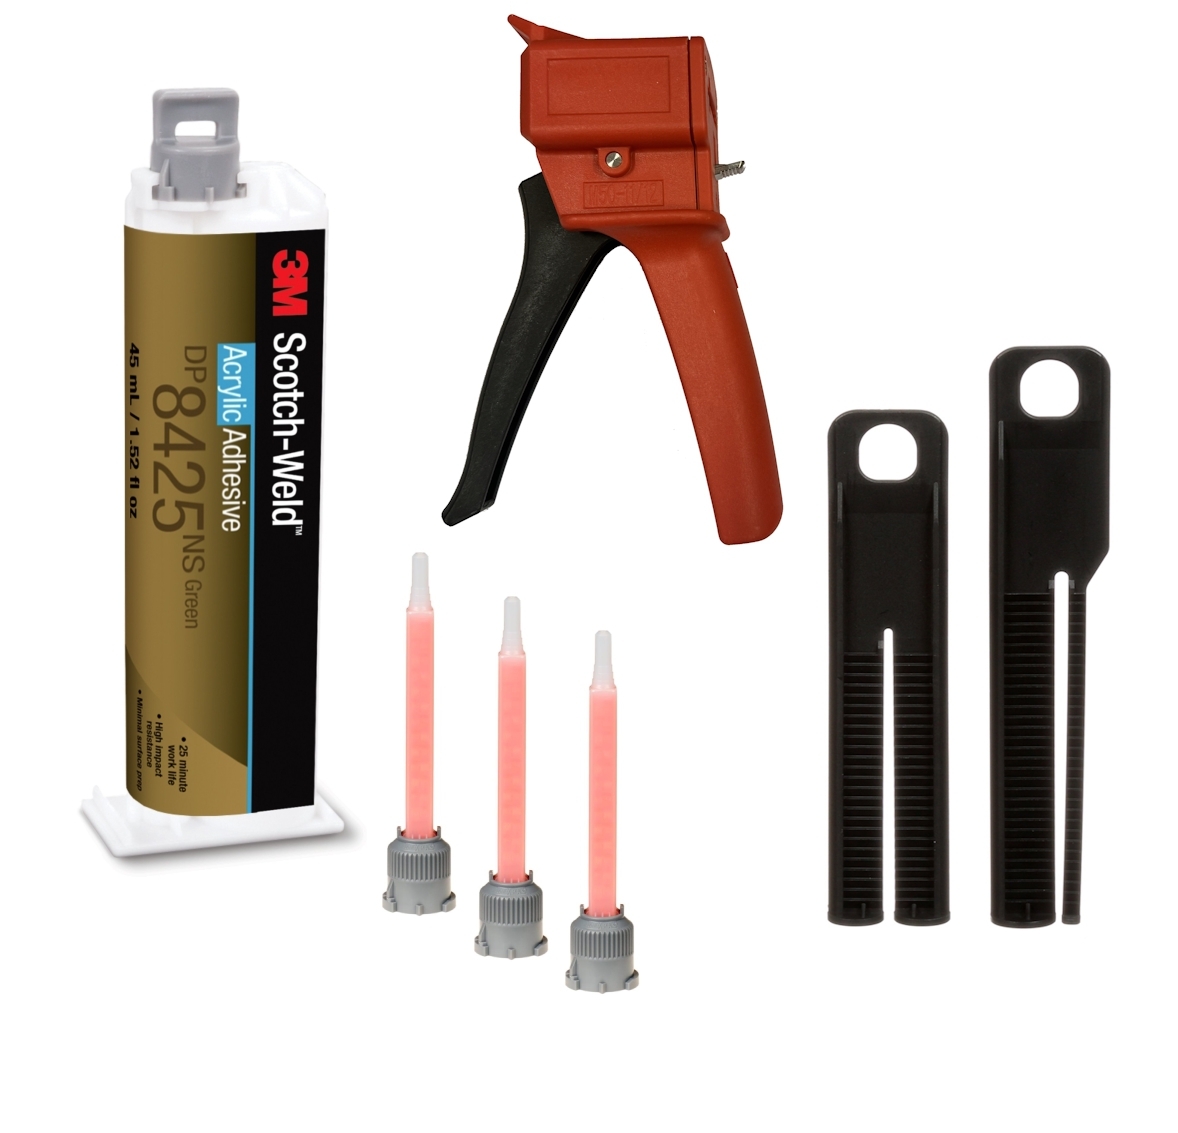 Starter set: 1x 3M Scotch-Weld 2-component construction adhesive EPX System DP8425 NS, green, 45 ml 1x S-K-S hand tool for EPX 38 to 50 ml cartridges incl. feed piston 2:1